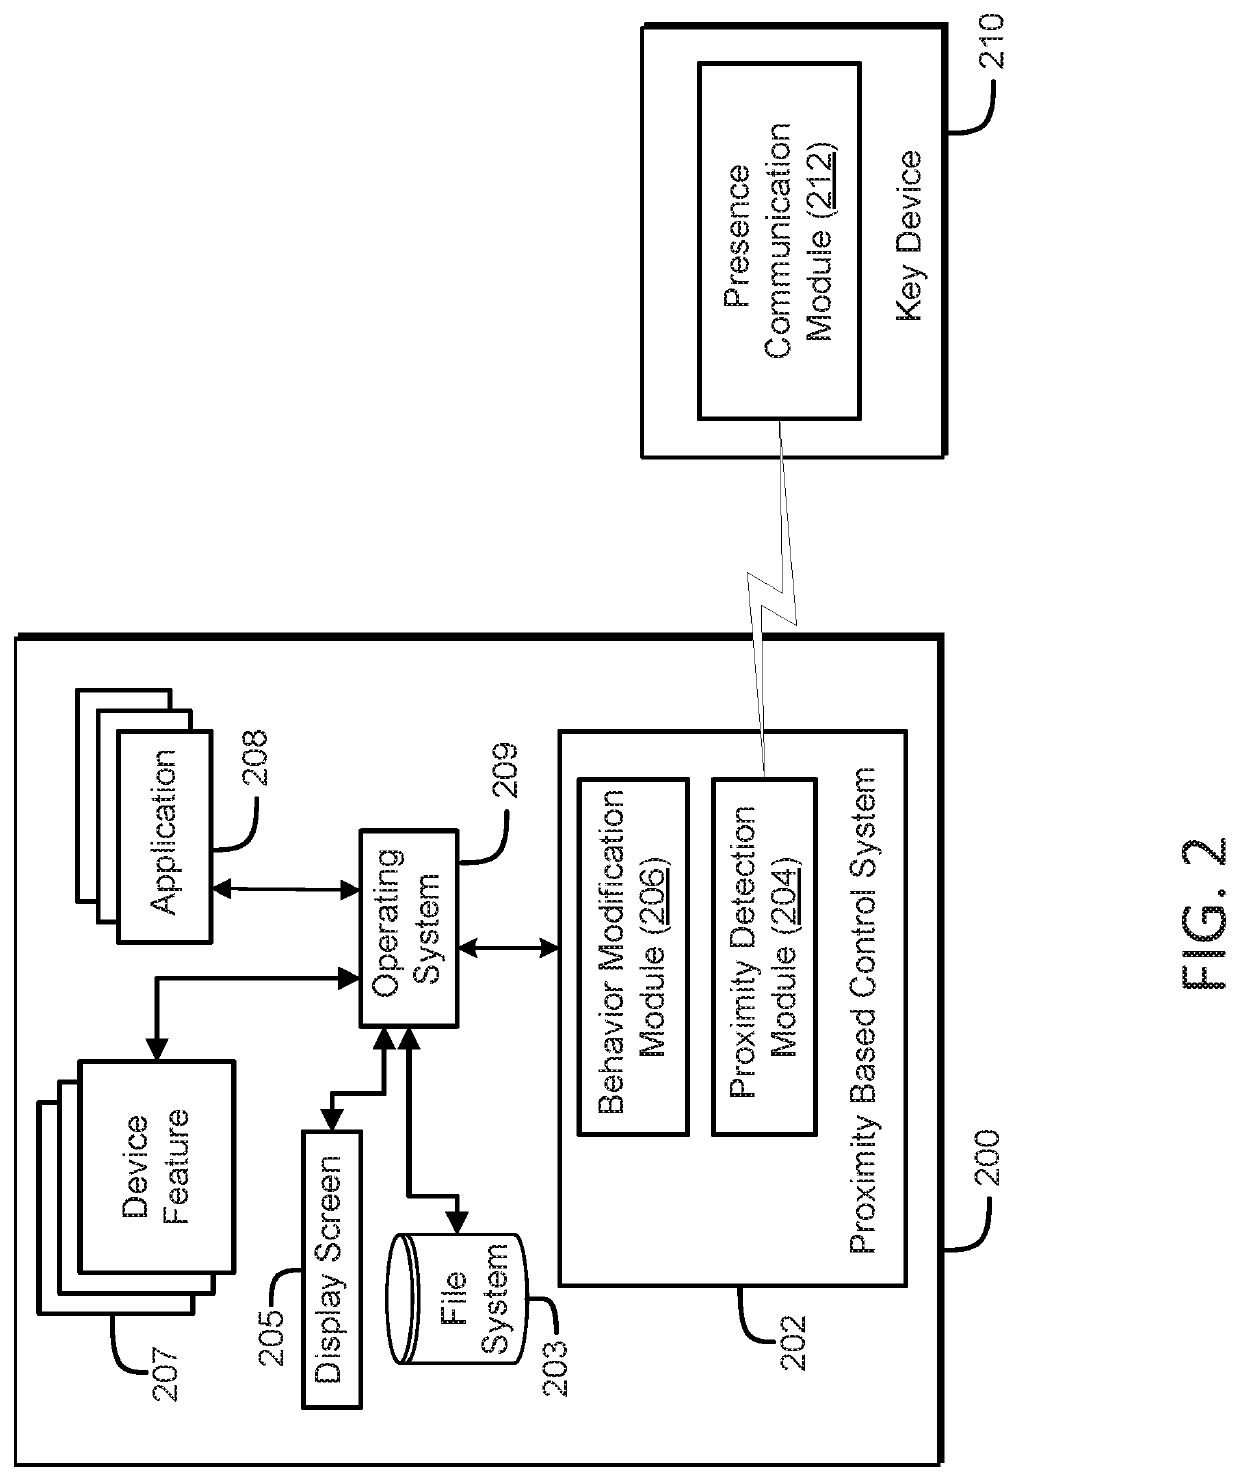 Method for changing mobile communications device functionality based upon receipt of a second code and the location of a key device